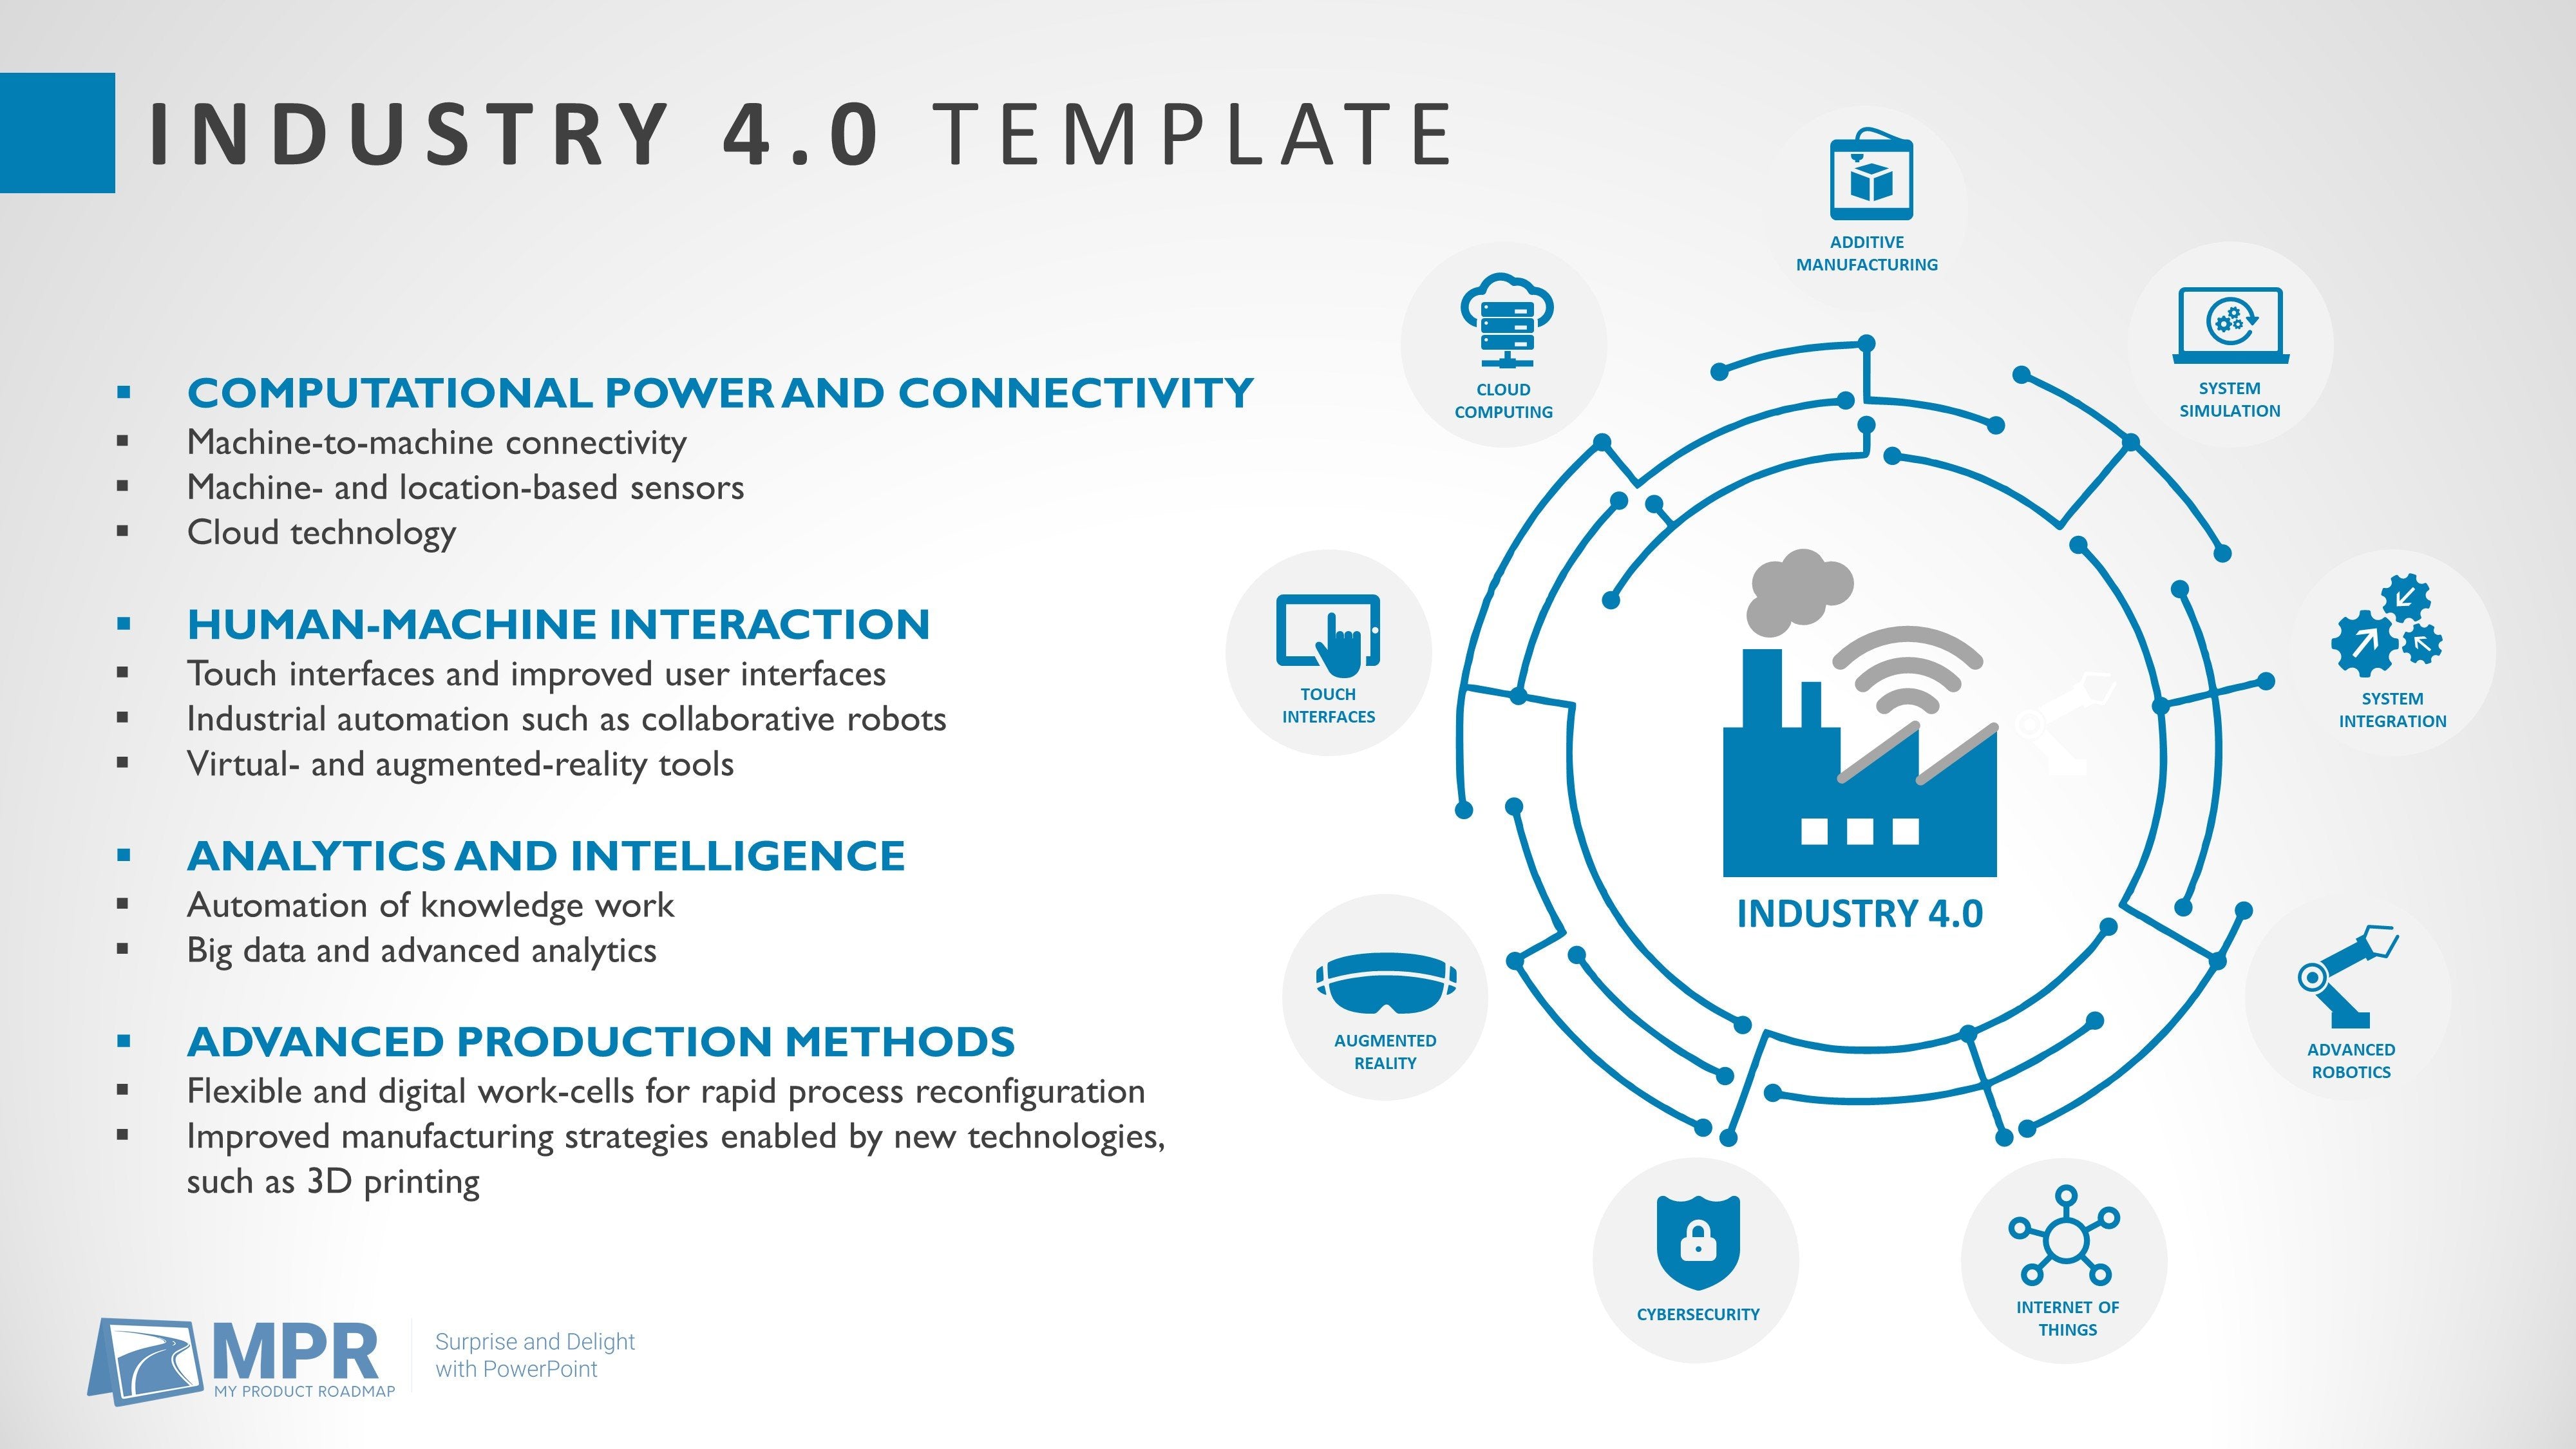 What is Industry 4.0 and how does it work?